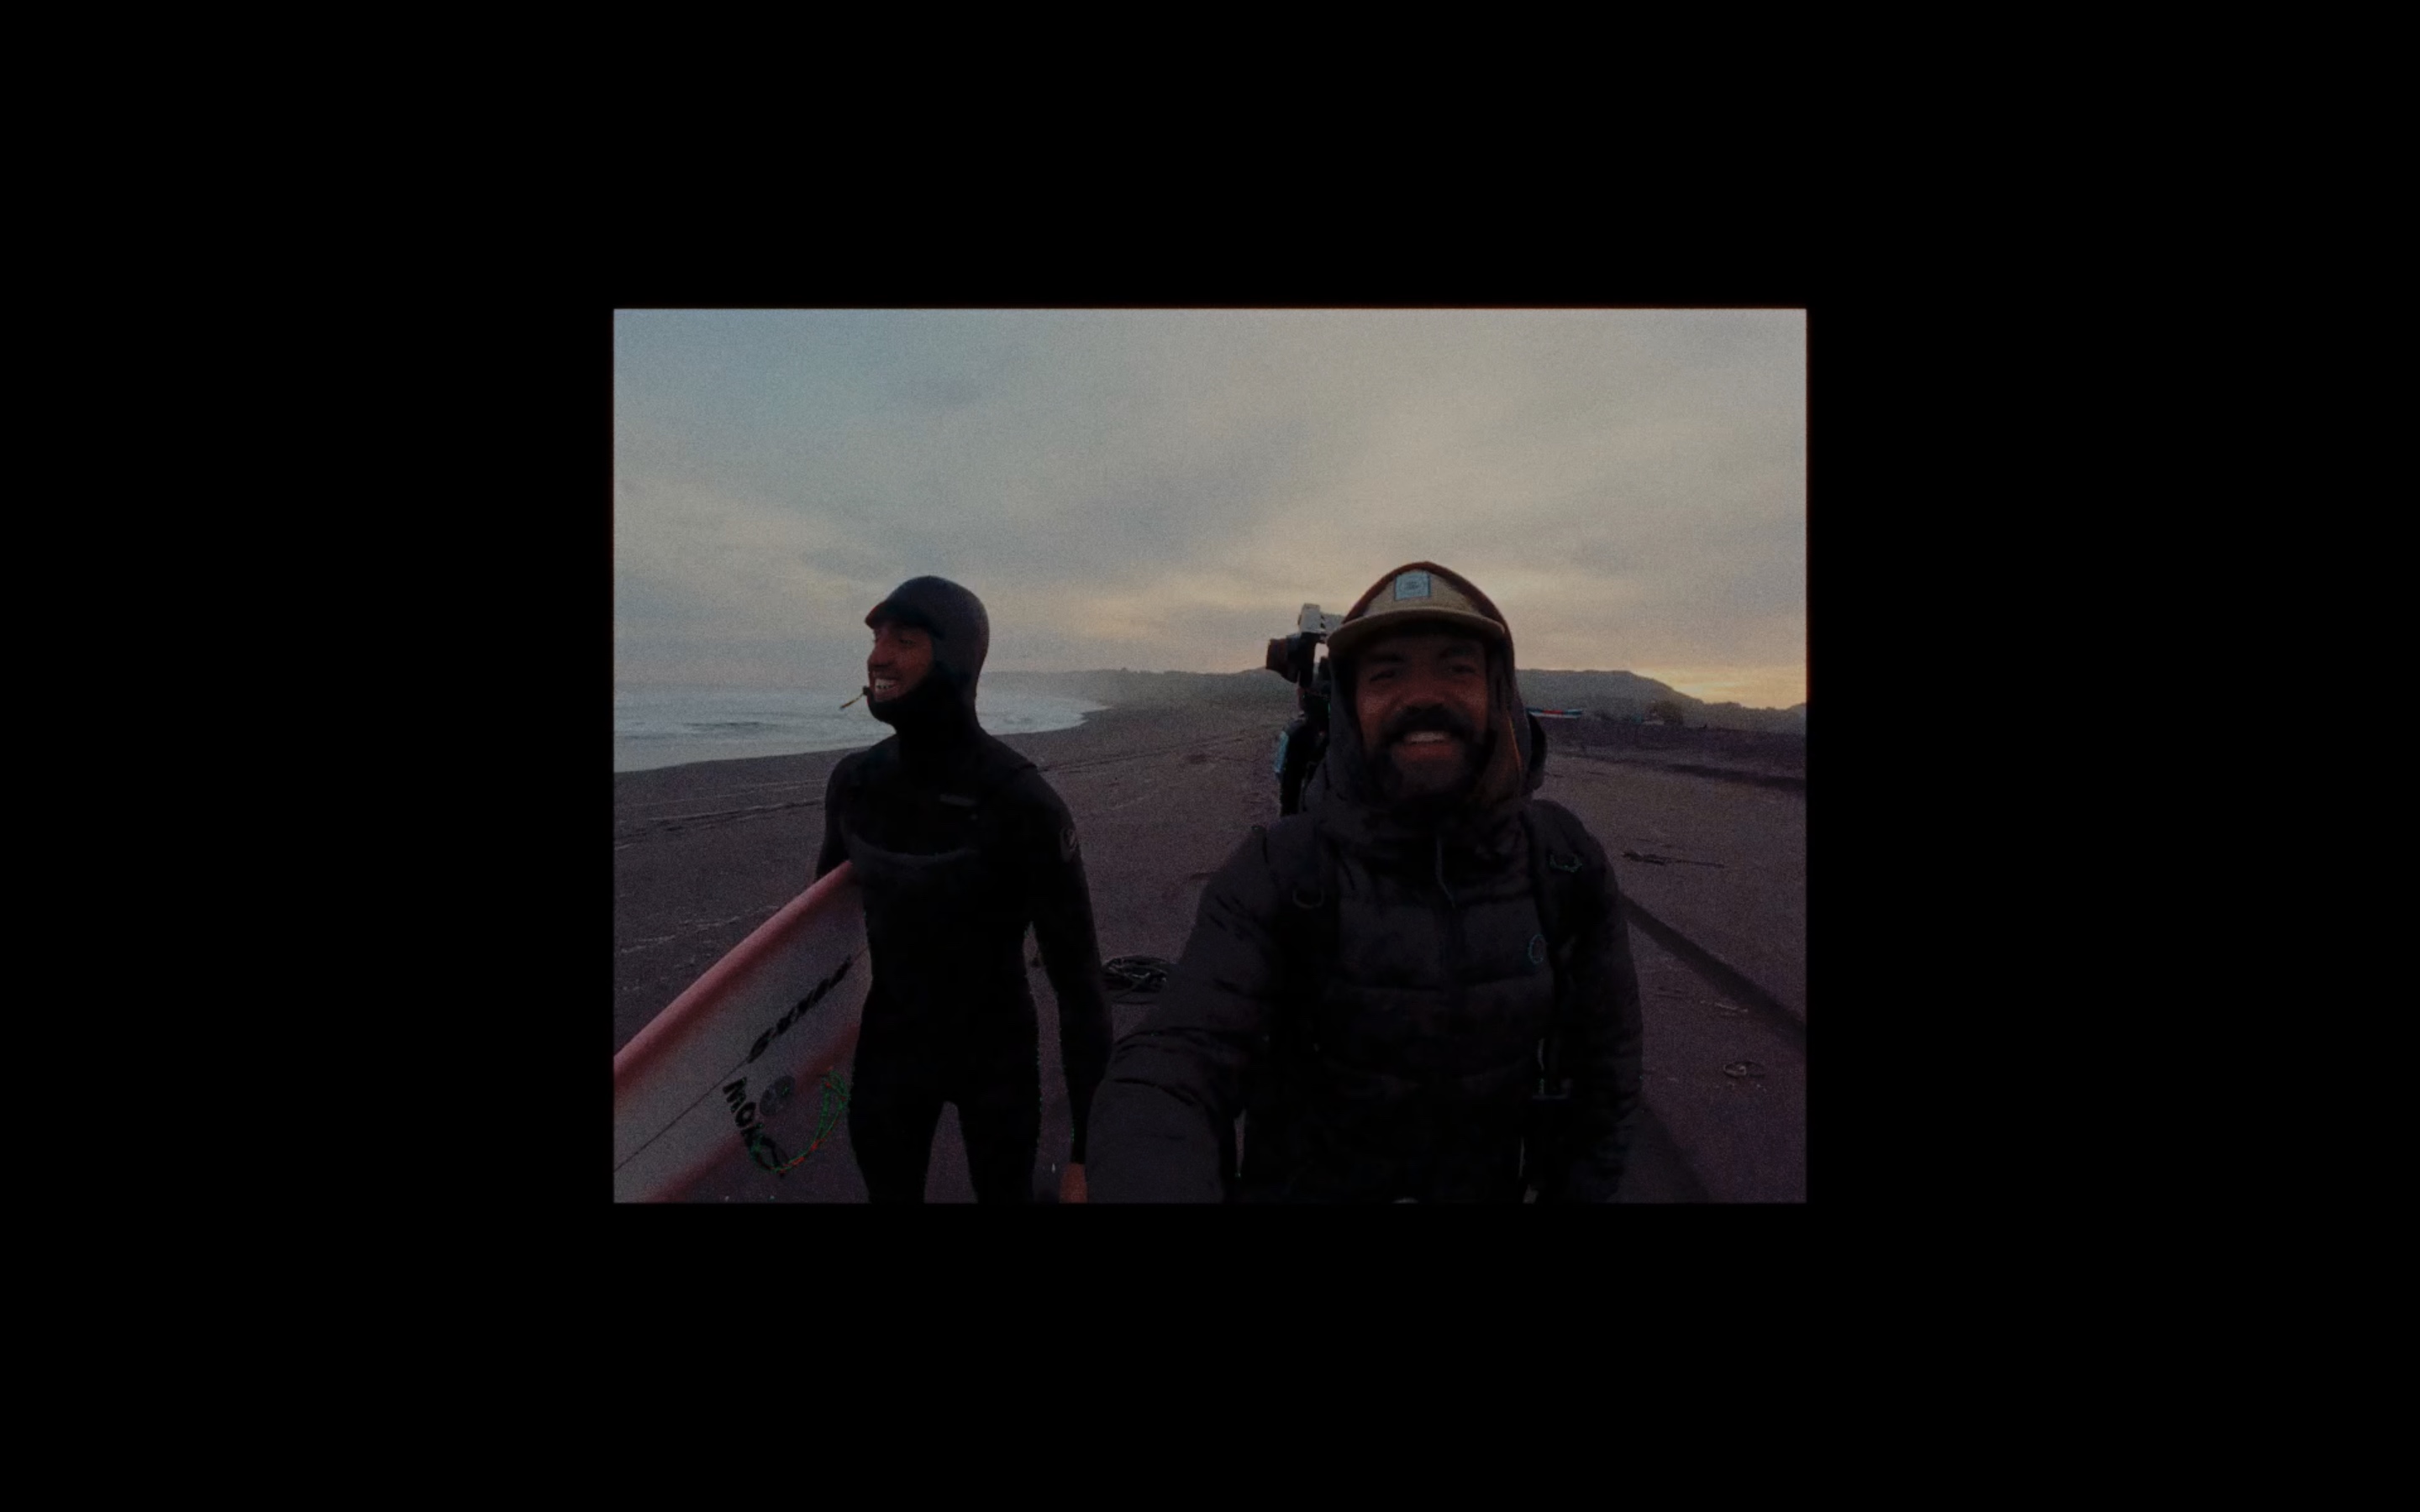 UP TO YOU! , the surf film of a Chile trip directed by Antonio Bretones